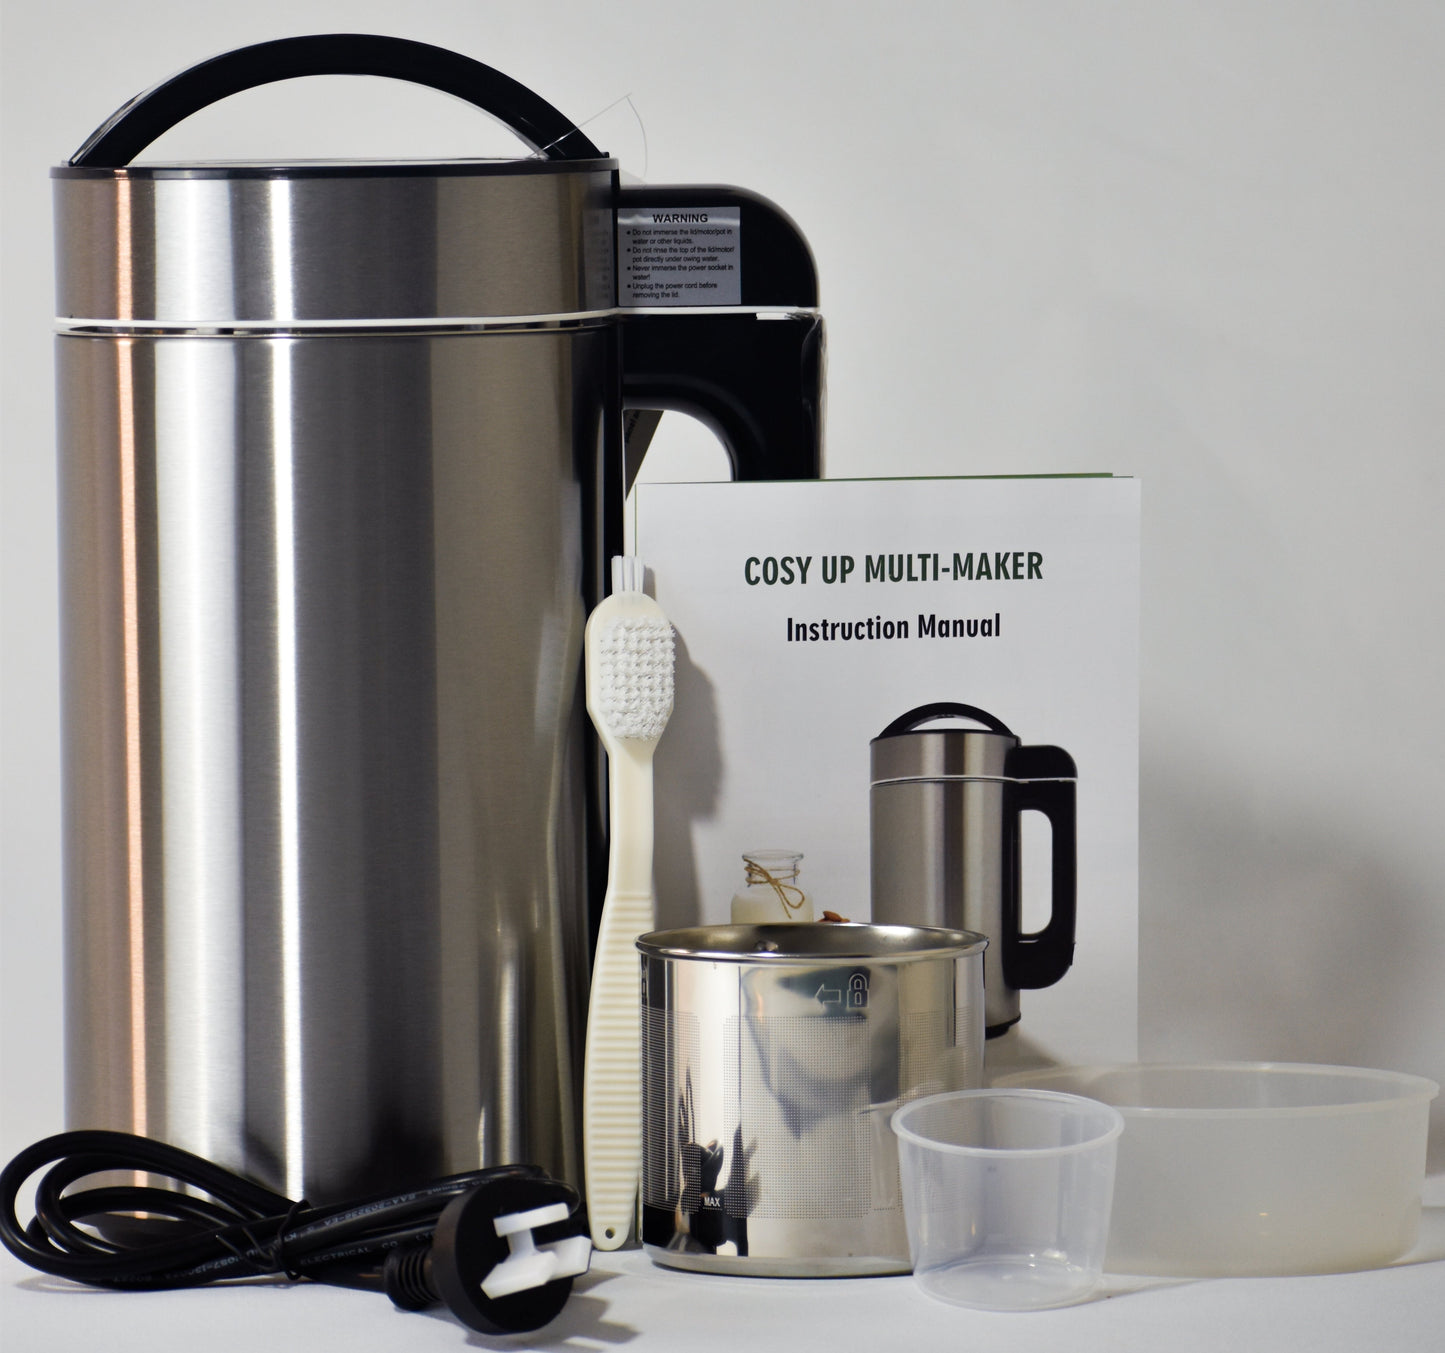 Cosy Up Multi-Maker - Make Nut, Grain and Seed Milk, Fruit and tea infusions in about 3 mins, Hot Soup and Hot milk in about 25 mins. In the comfort of your home, without the mess.